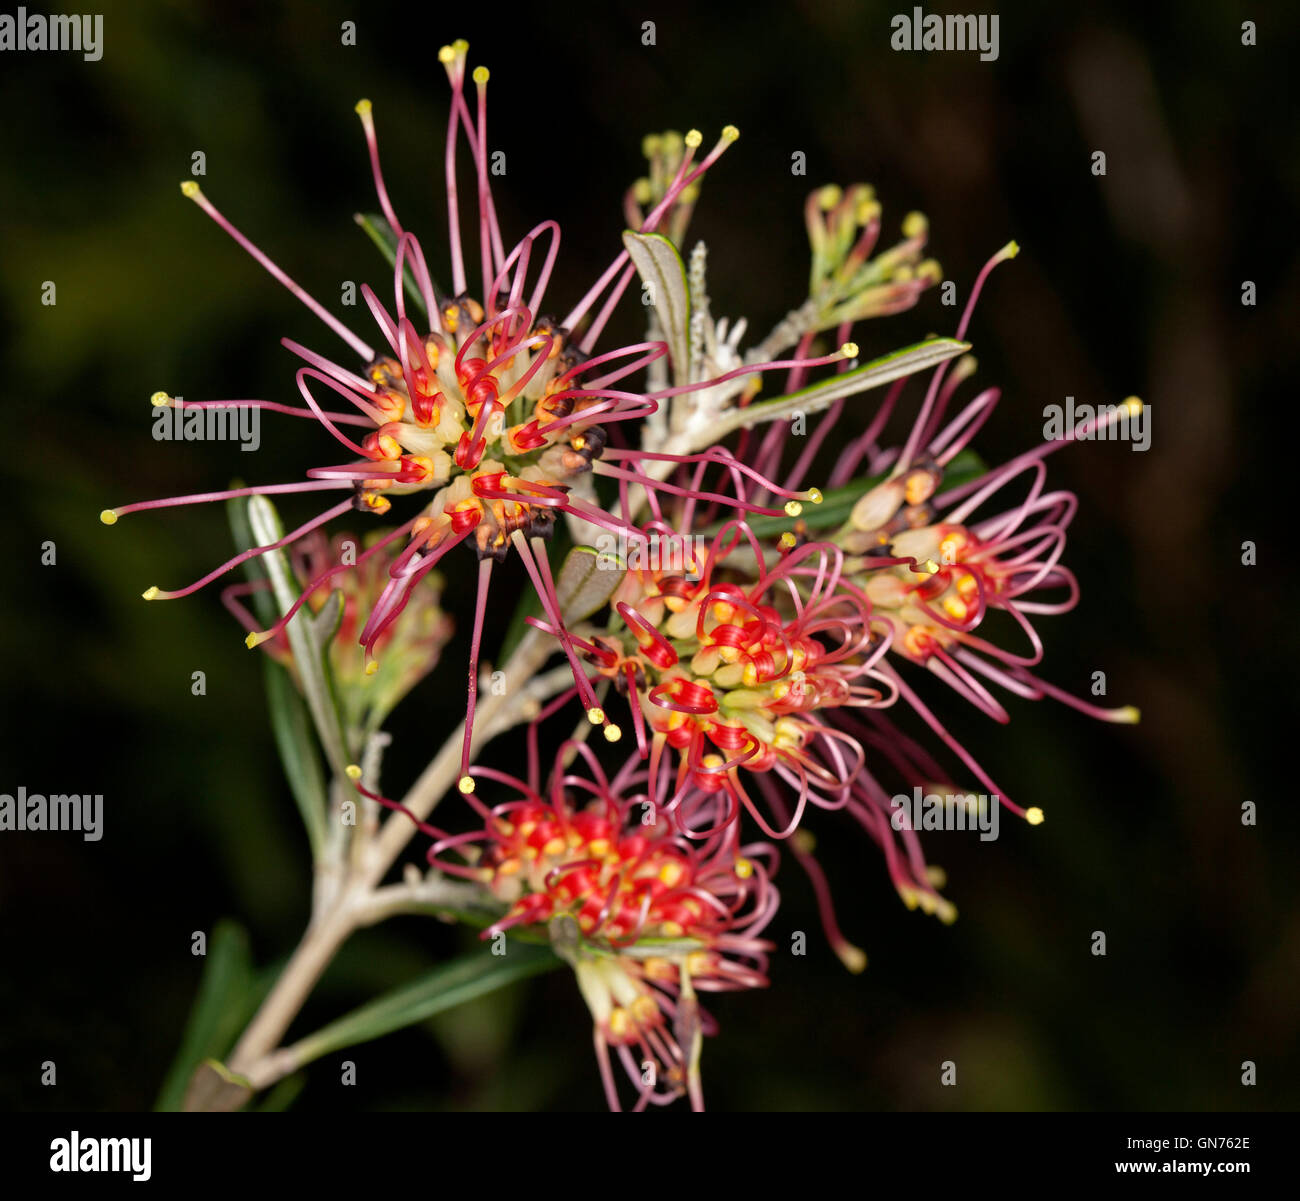 Cluster of stunning vivid red & yellow flowers of Grevillea 'Red Sunset', Australian native plant, on dark background Stock Photo